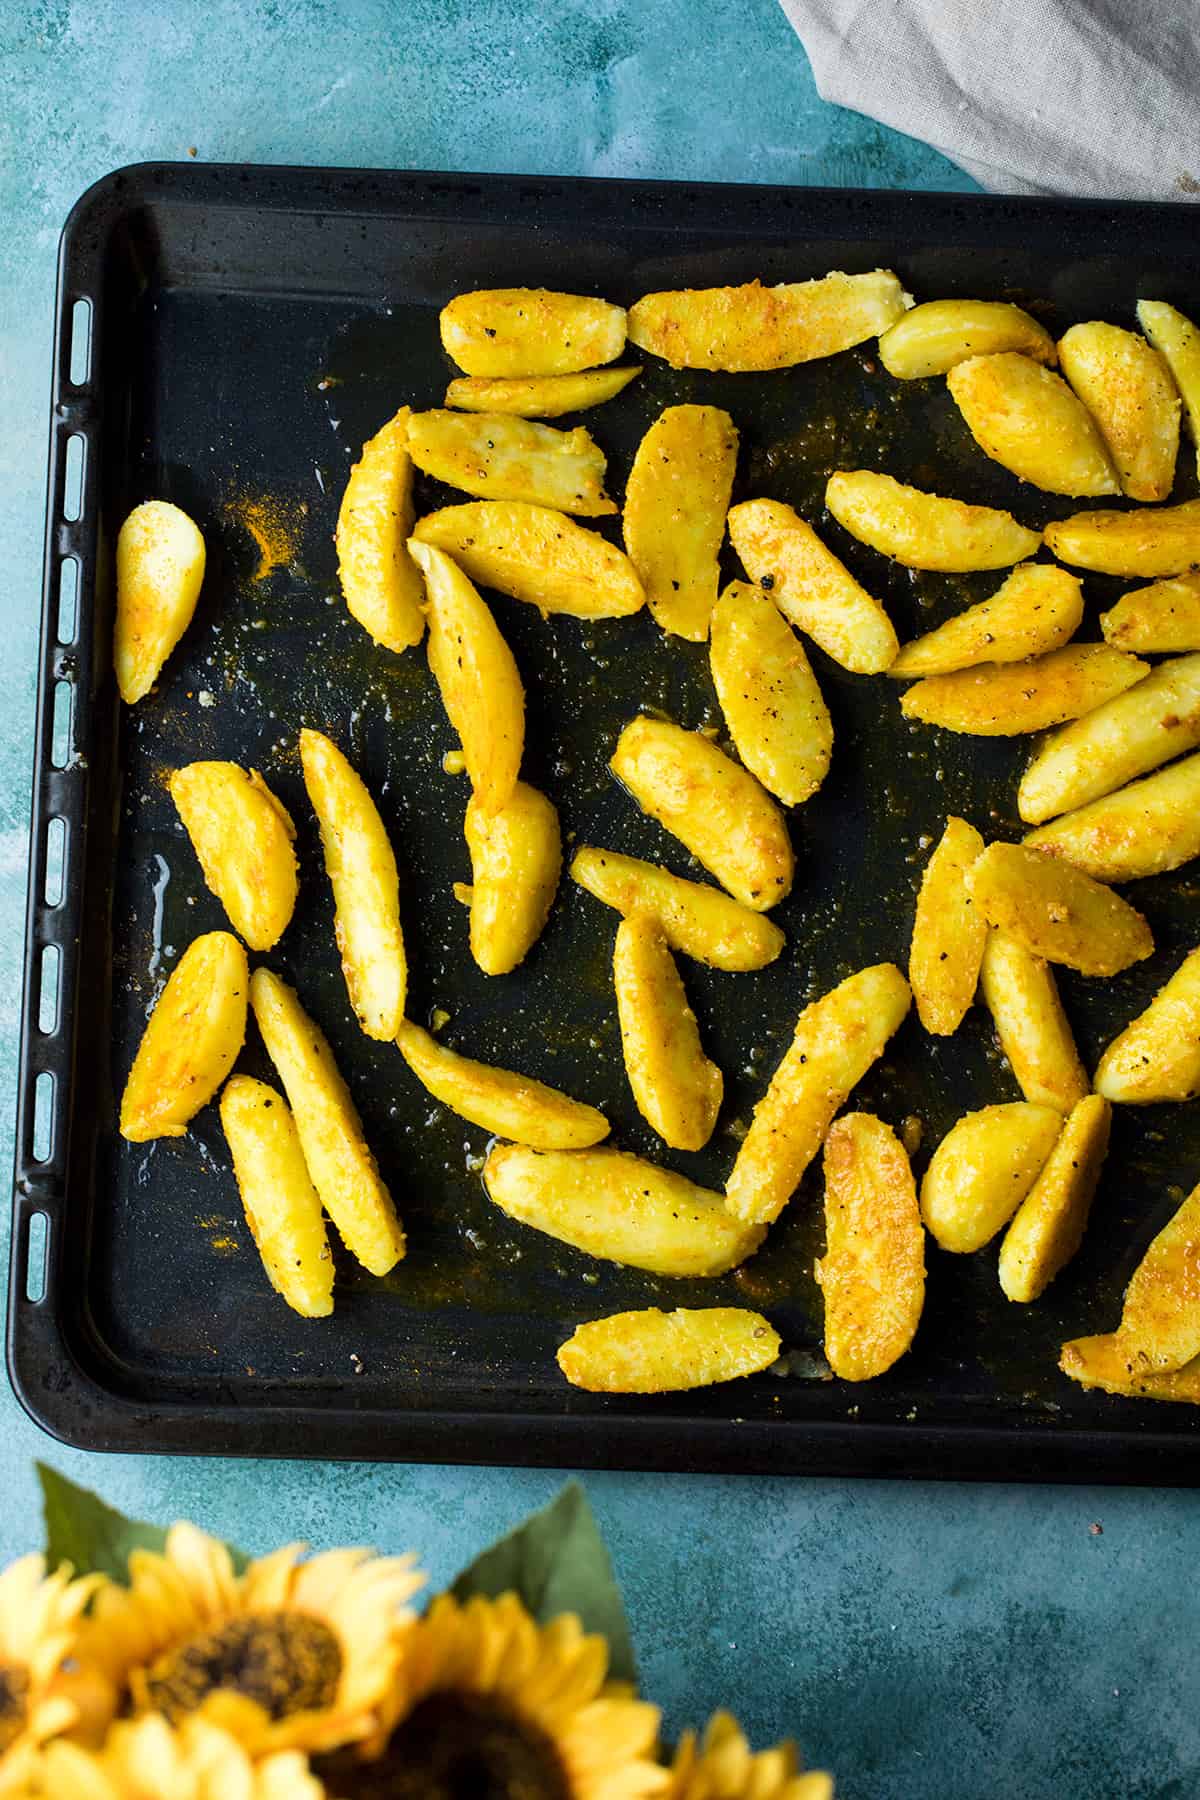 Fingerling potatoes mixed with turmeric on a baking sheet.